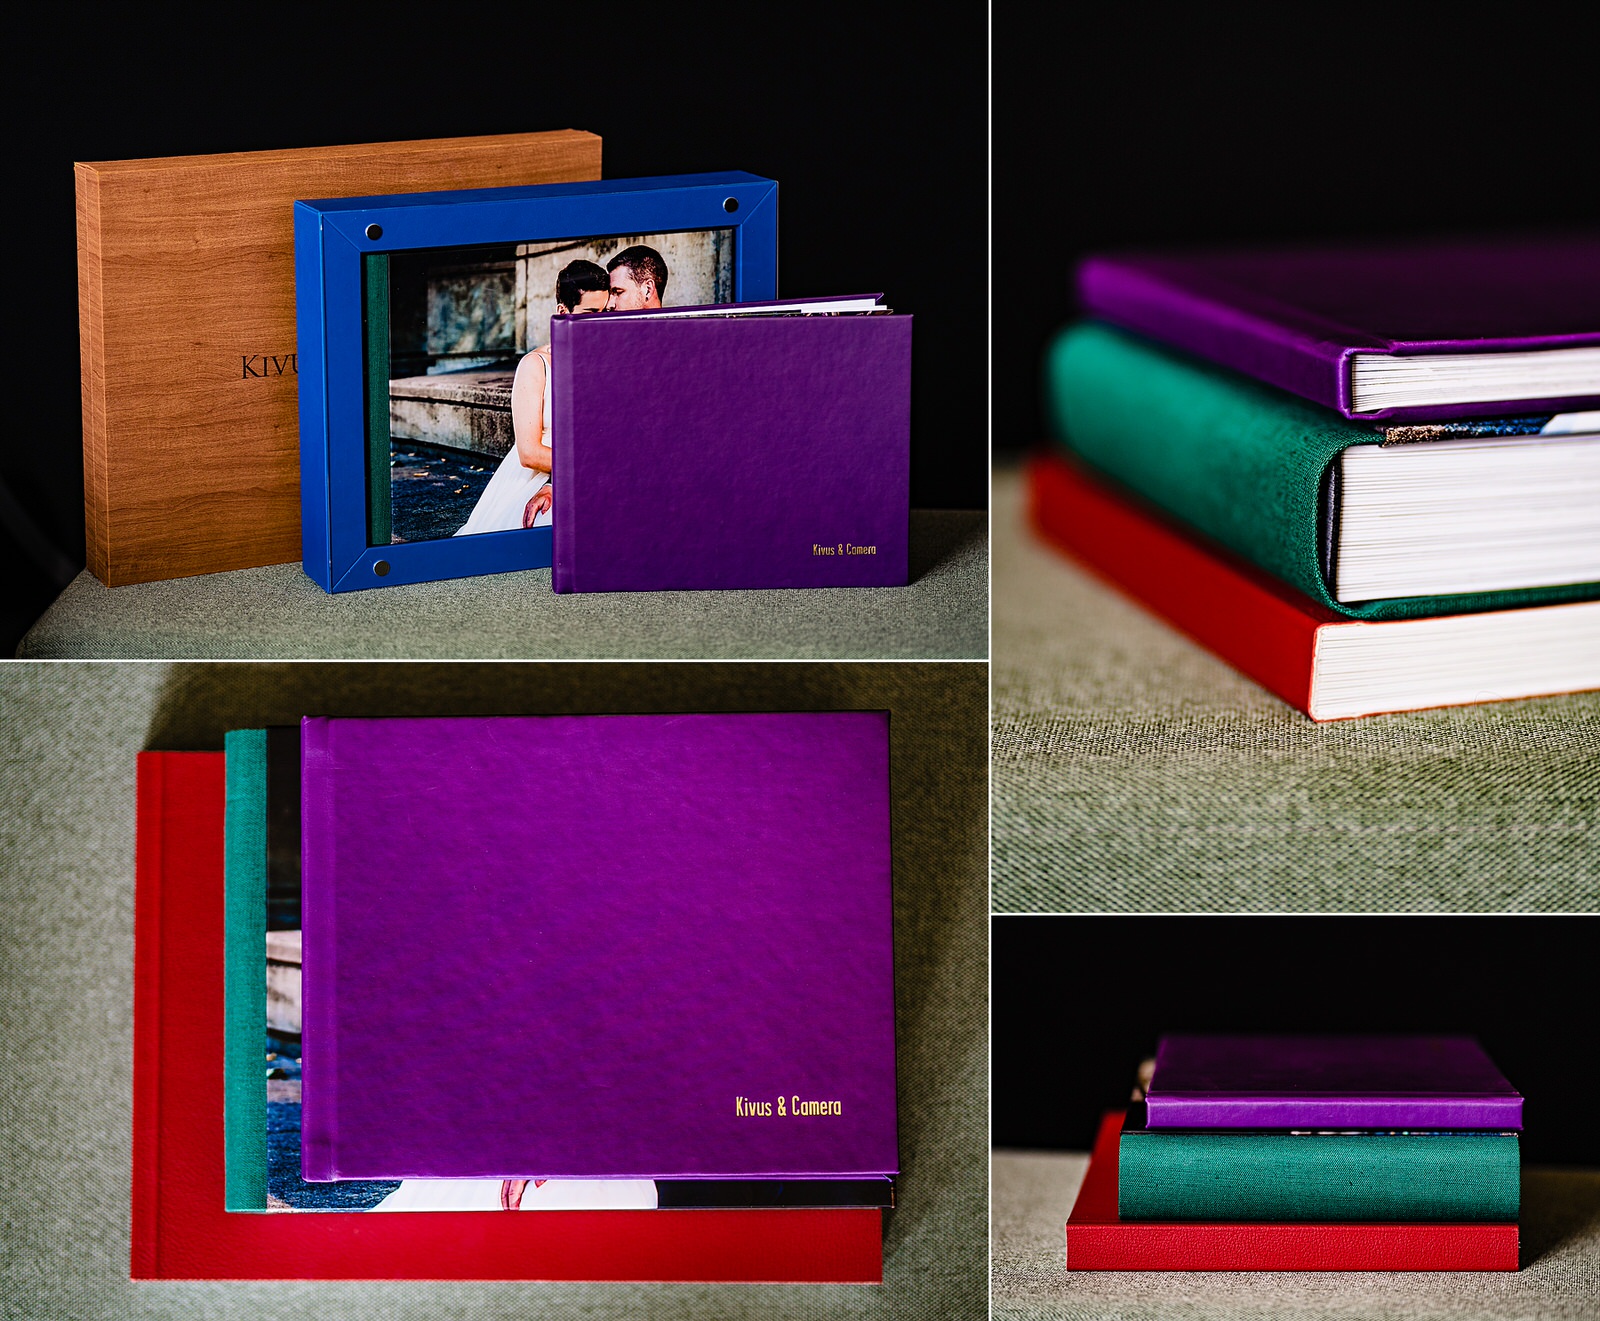 Wedding albums from Kivus and Camera to show one way to backup my wedding photos